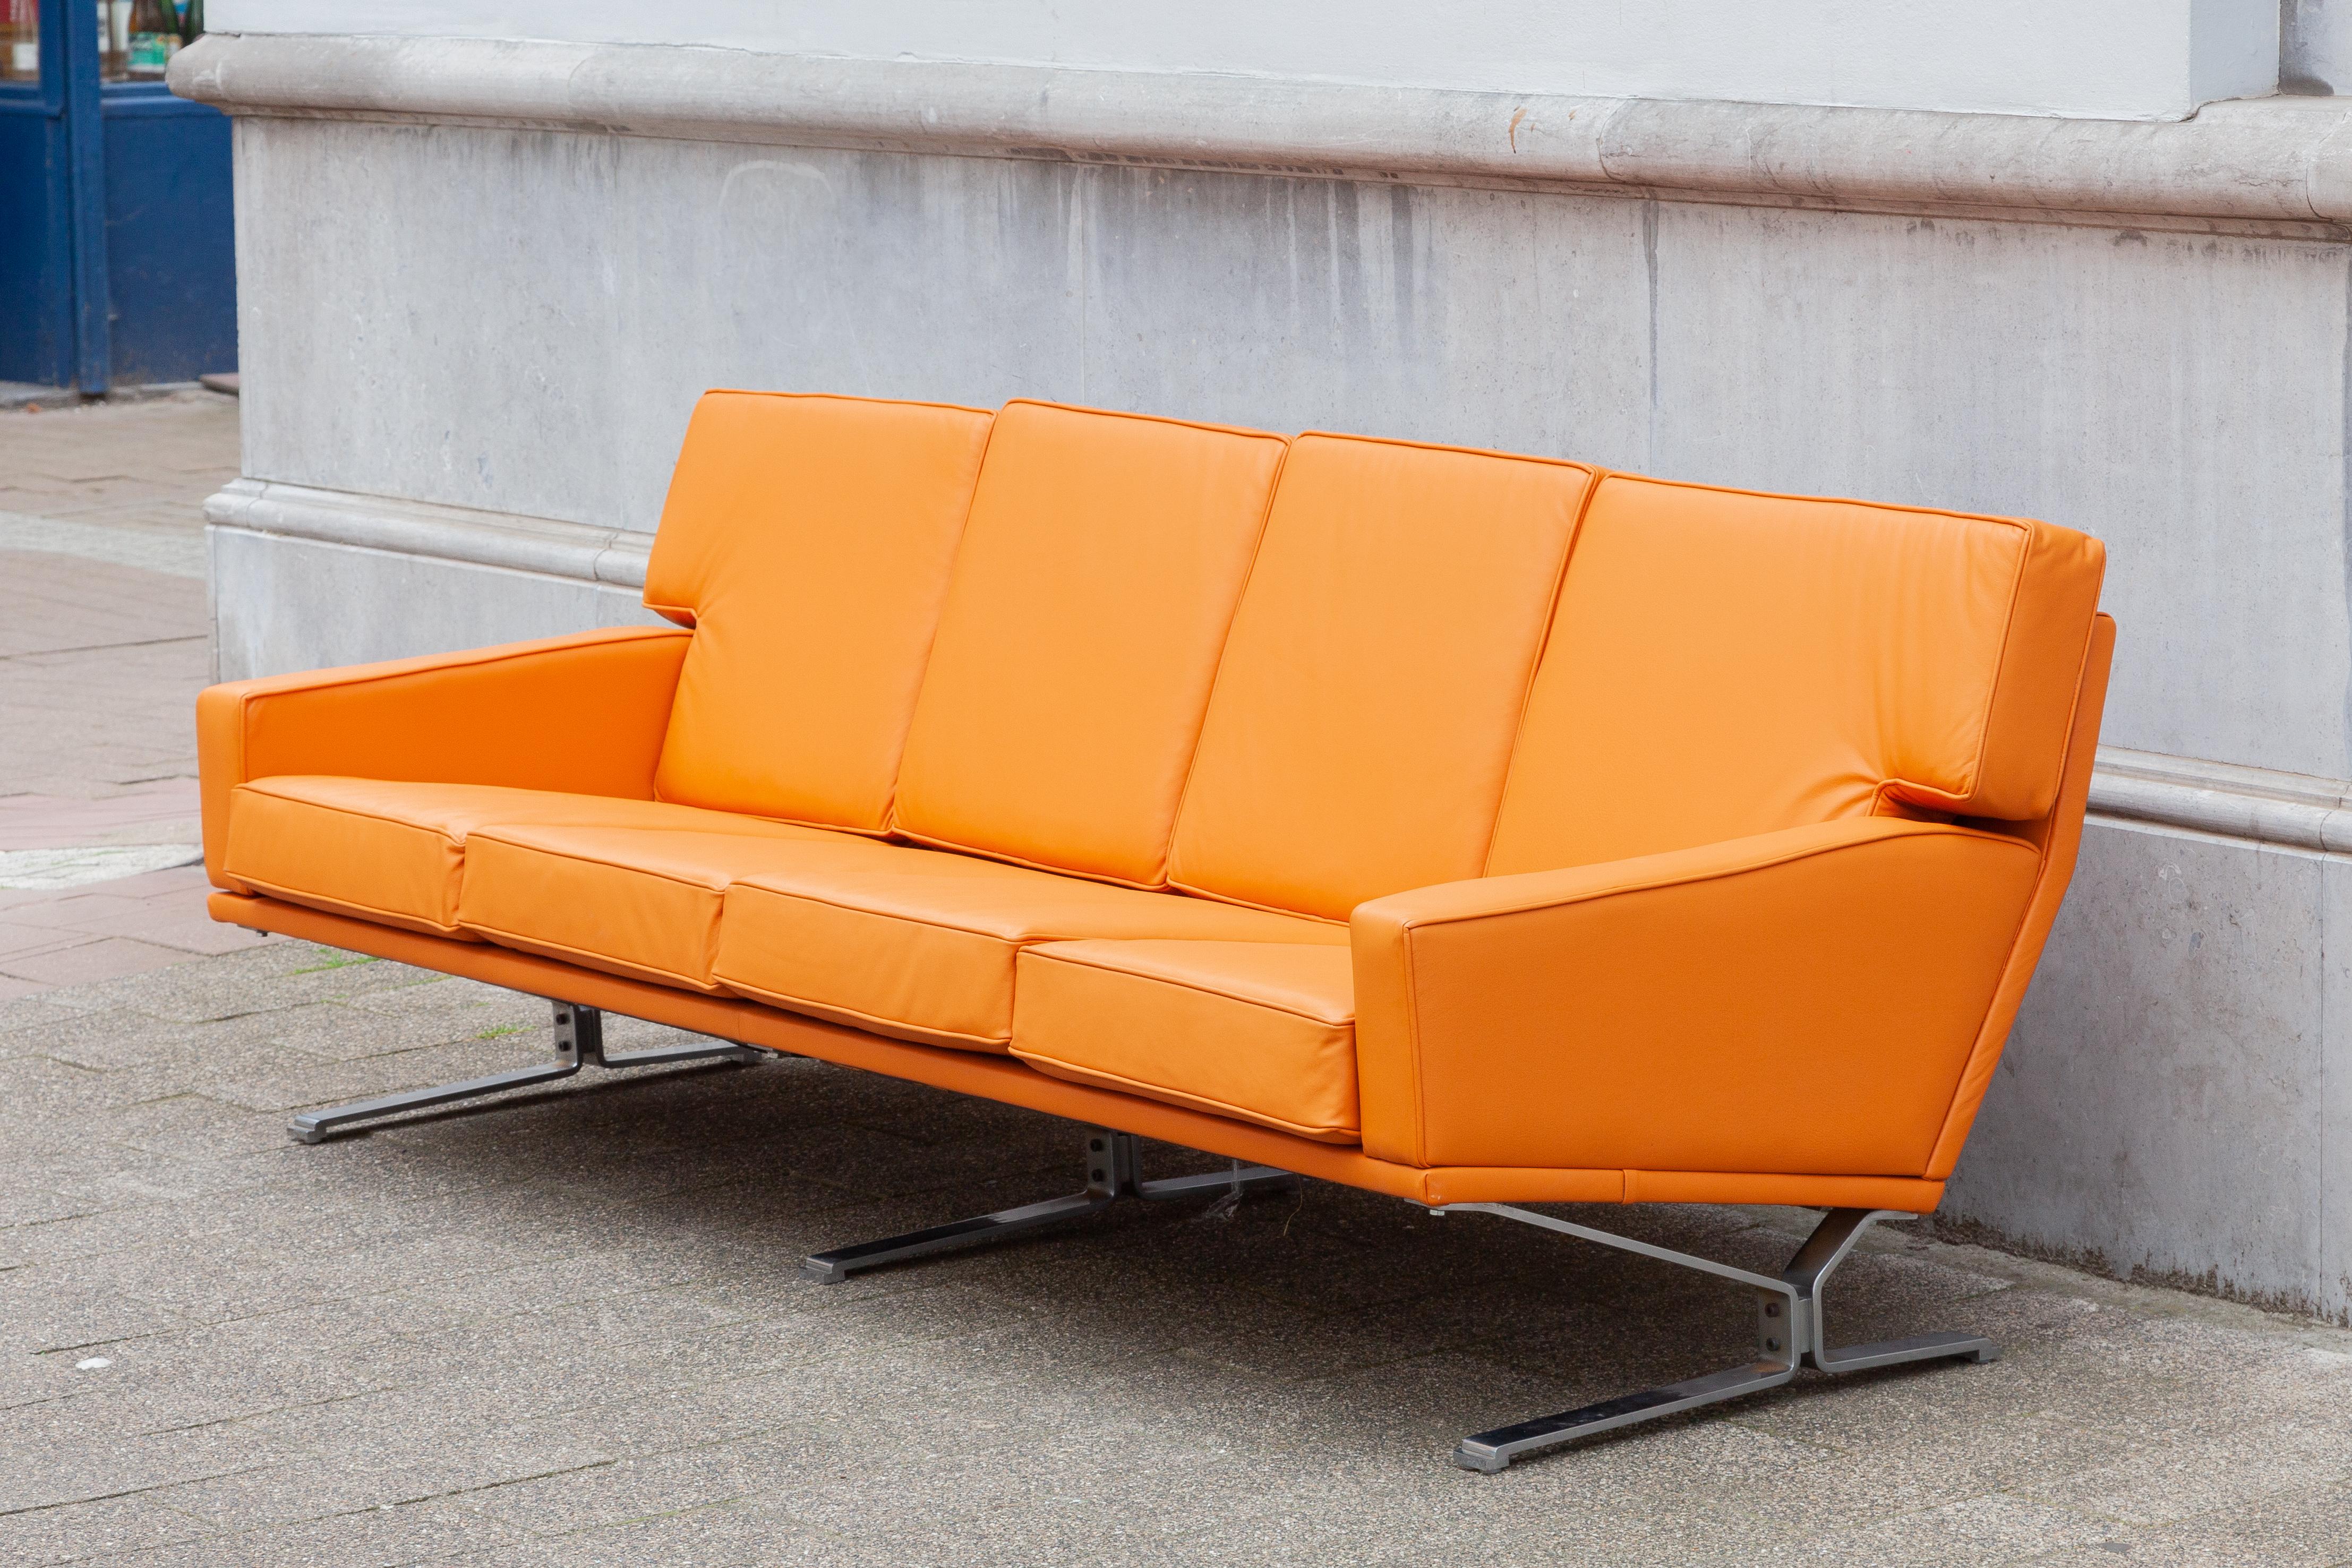 Midcentury Modern Cognac Color Four-Seat Sofa, Living Roomset, 1960s, Denmark In Good Condition For Sale In Antwerp, BE